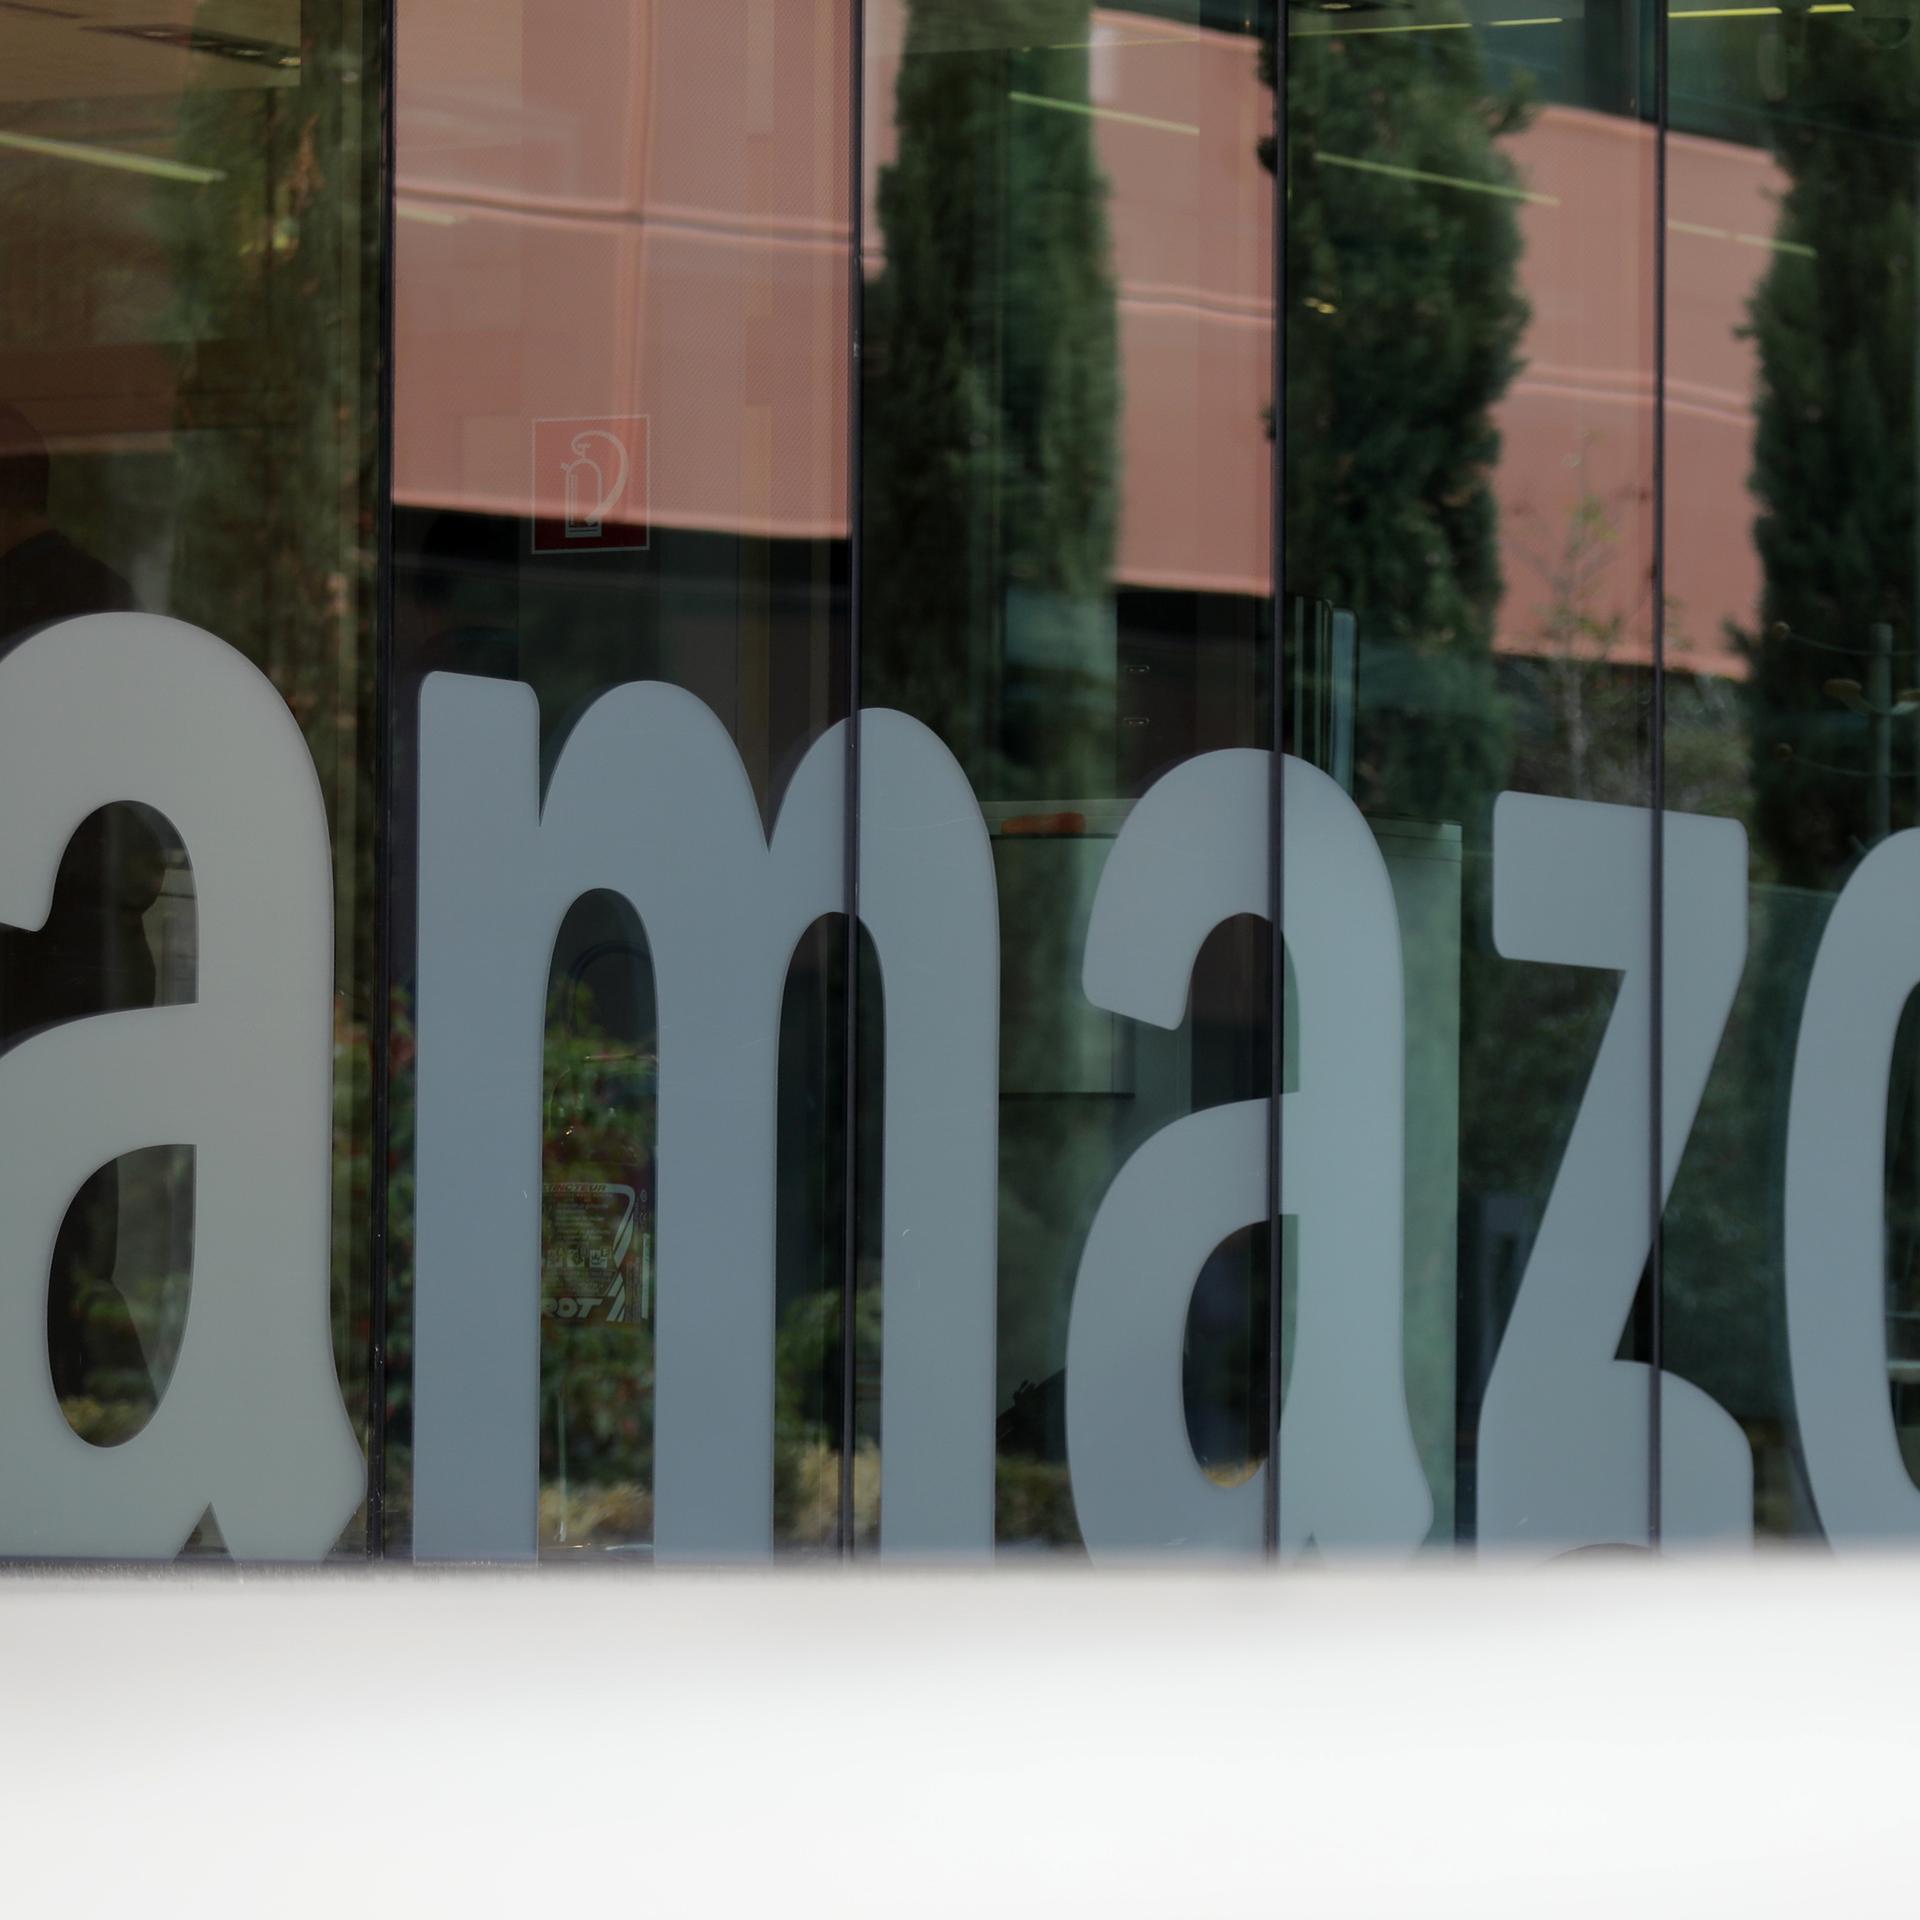 Online retail giant Amazon, which has its EU headquarters in Luxembourg, received a €746 million from the country’s data protection regulator in 2021